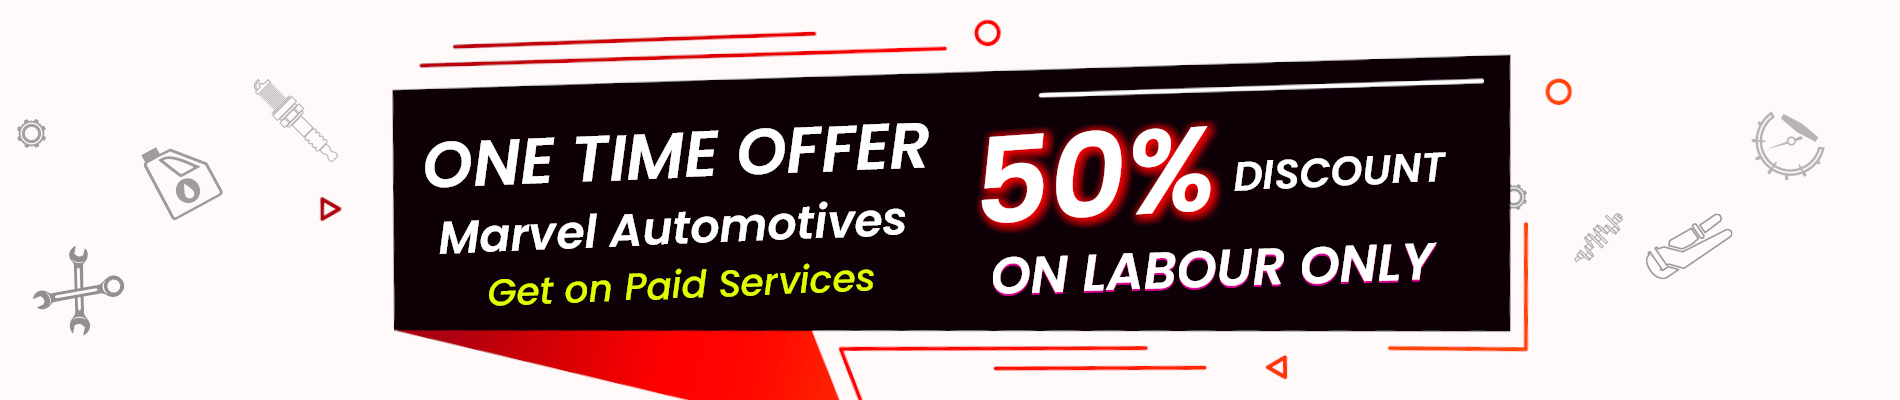 coupon booklet offering 50 % on labour services